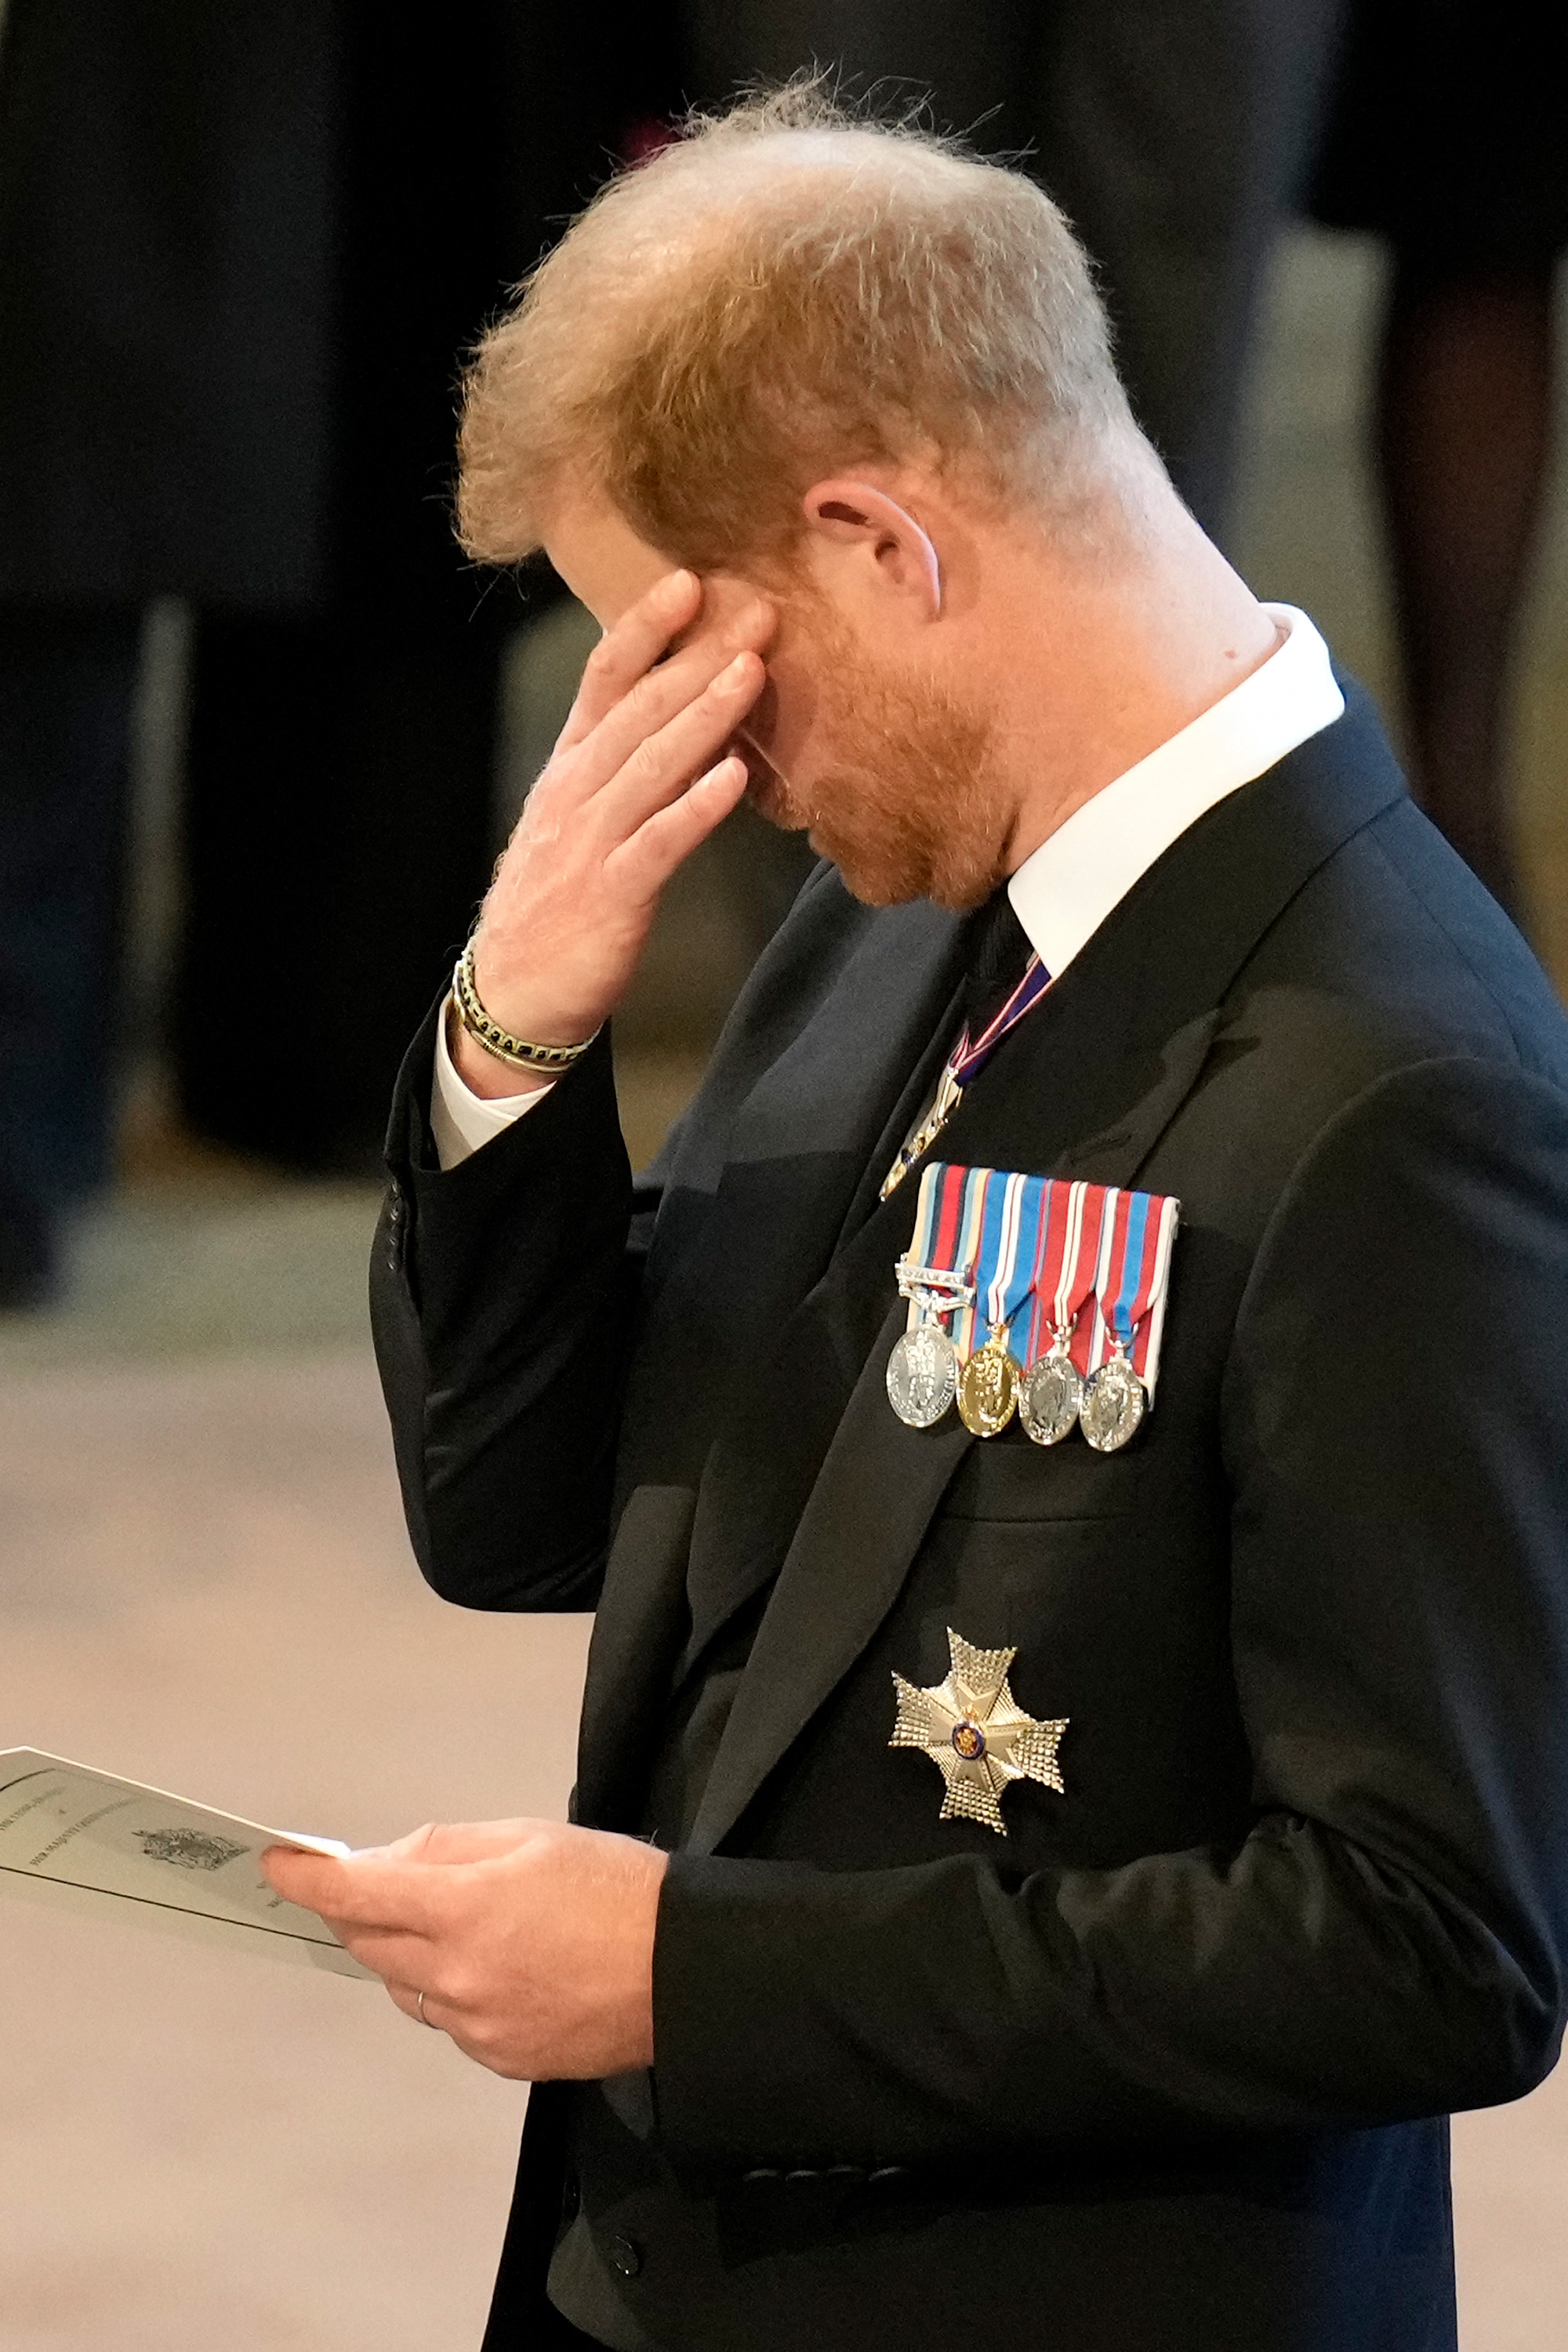 Prince Harry during a service for the reception of Queen Elizabeth II's coffin in London, England on September 14, 2022 | Source: Getty Images